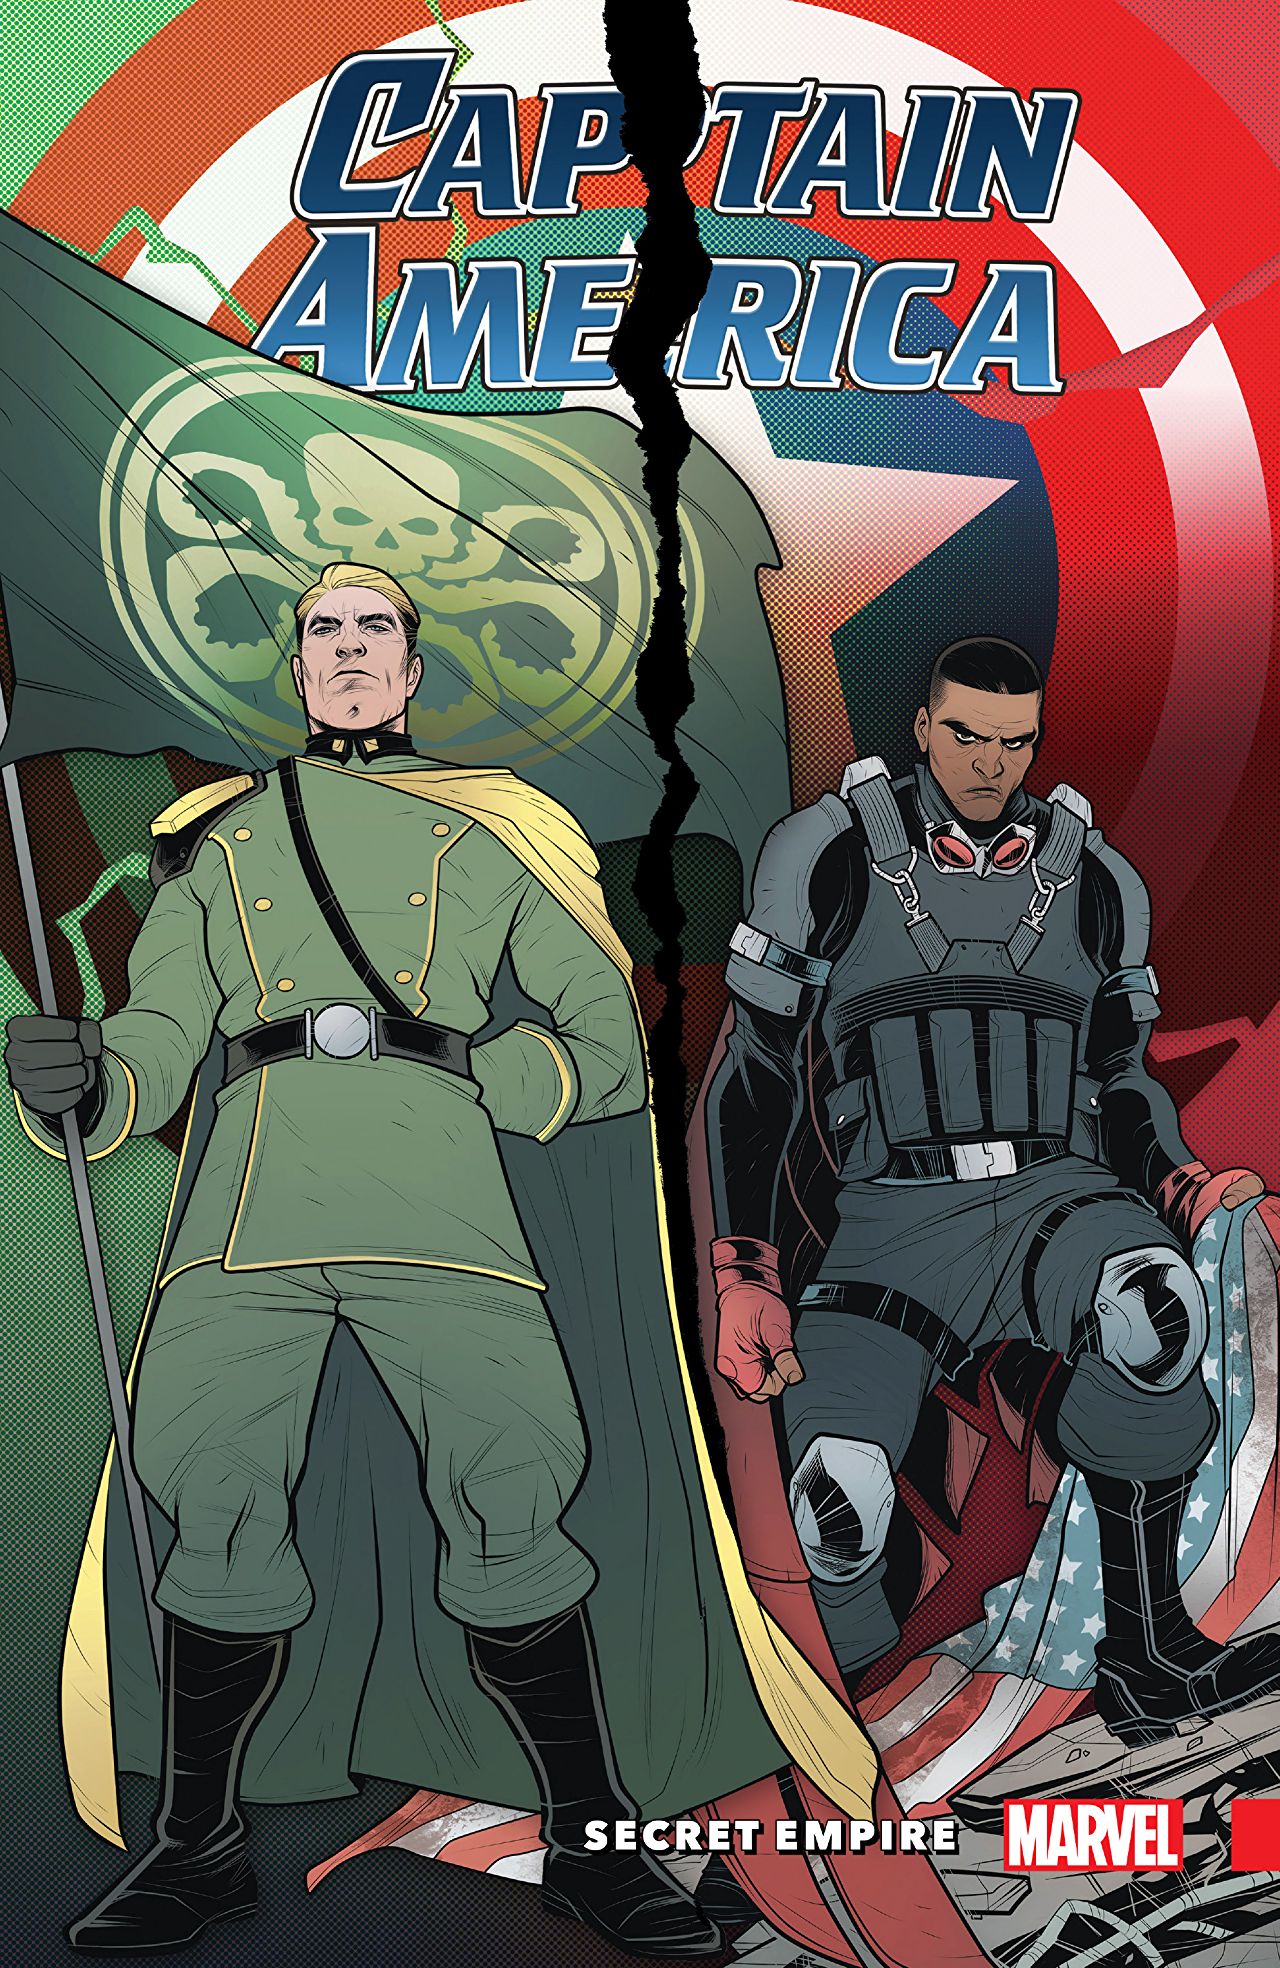 'Captain America: Secret Empire' review: Leaves readers wanting more in both positive and negative ways